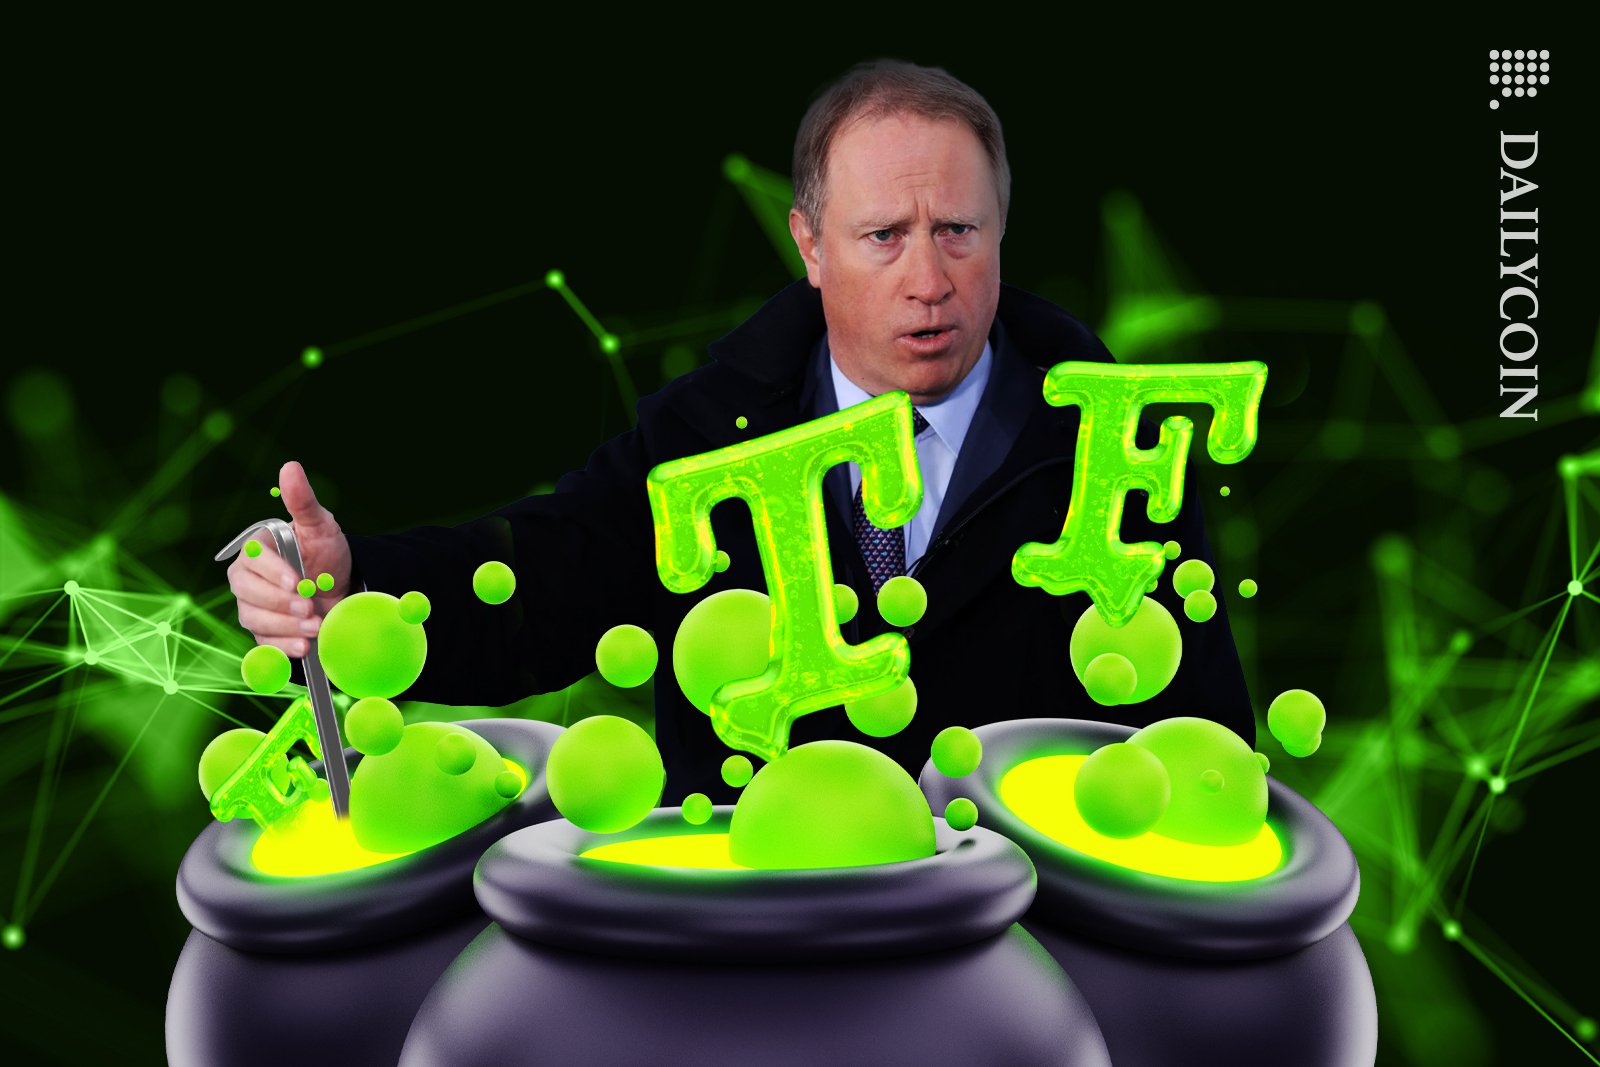 Ted Pick CEO of Morgan Stanley making a big potion of ETF.